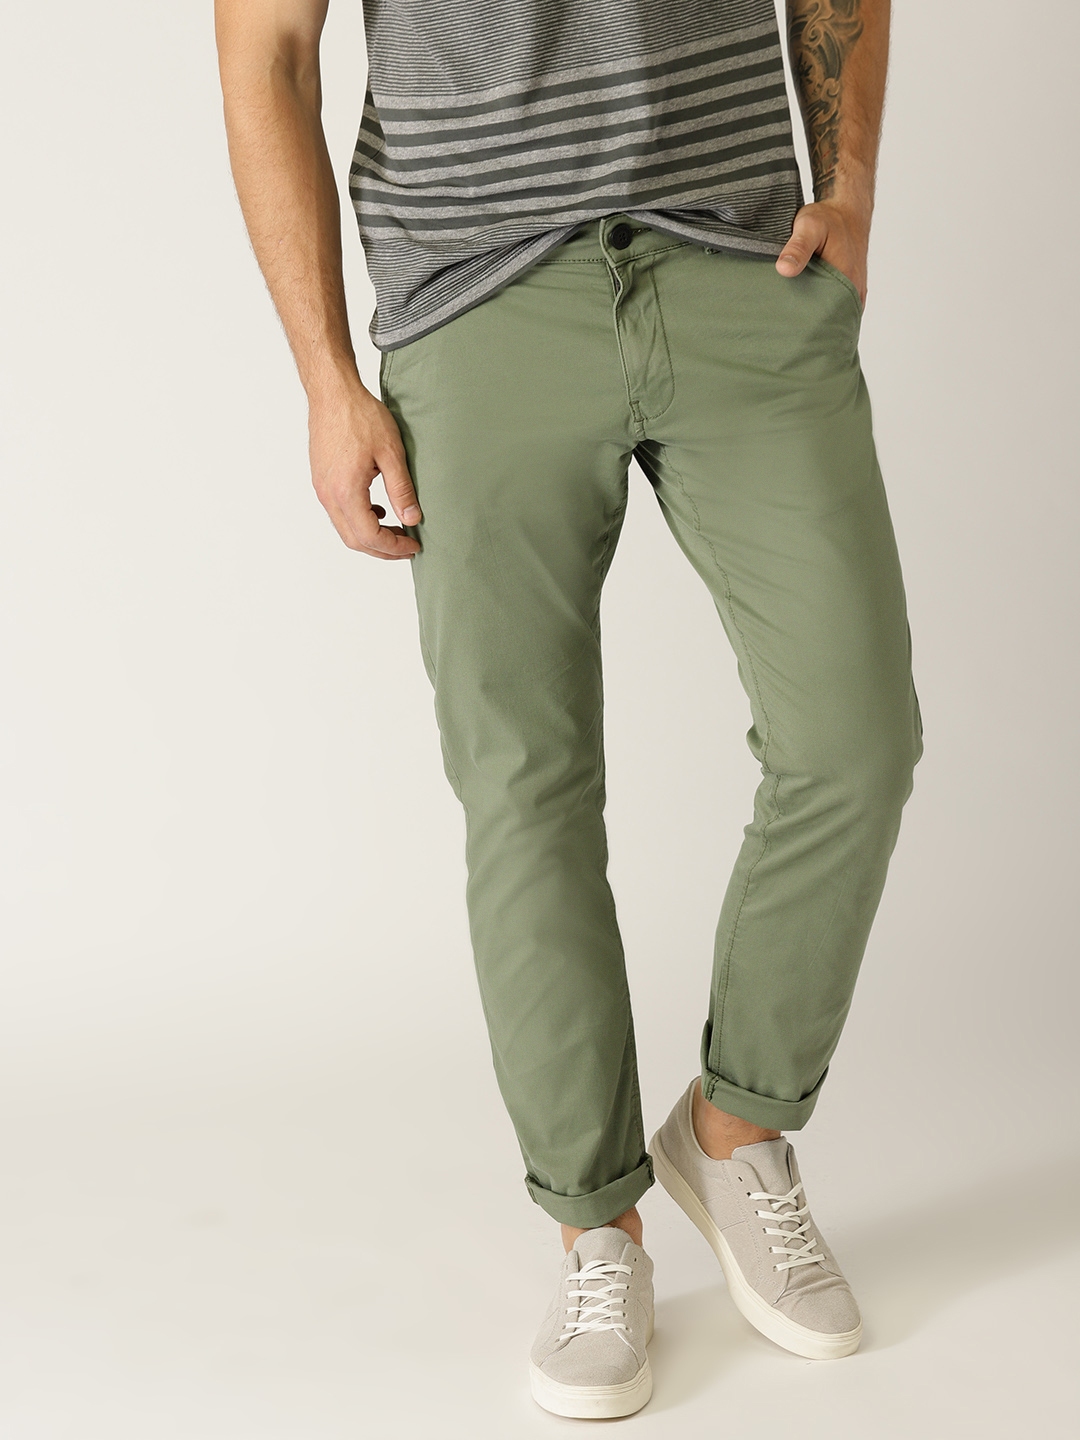 Shop the Latest in Mens Fashion Corduroy trousers  ESPRIT Taiwan Official  Online Store